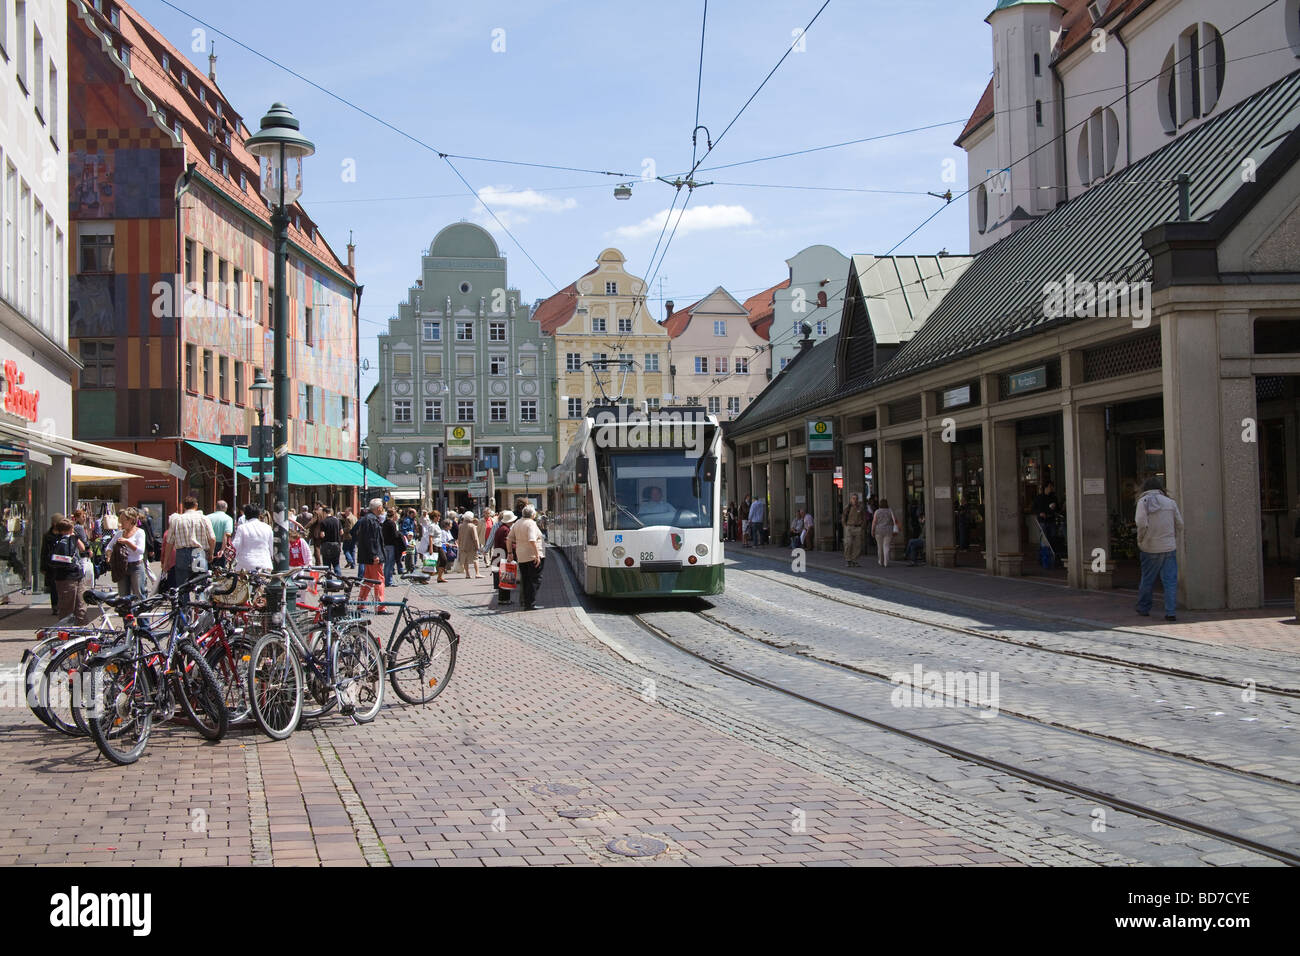 Augsburg Bavaria Germany EU Looking along the very busy Moritzplatz with a tram and parked bicycles Stock Photo